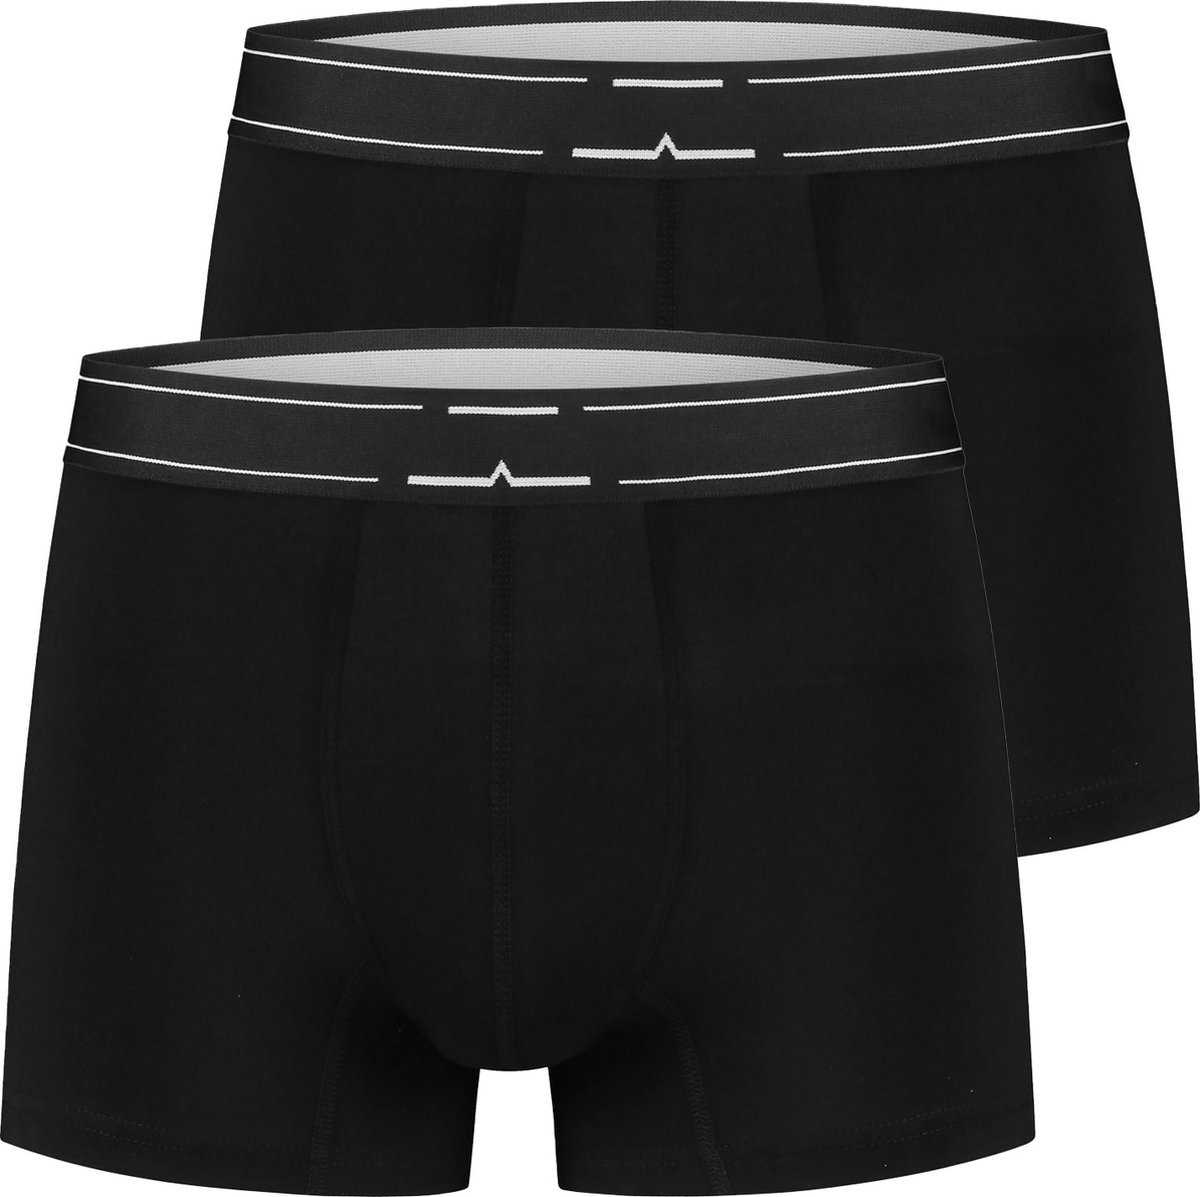 TheShort boxer short | Black| Ball Support | Size M